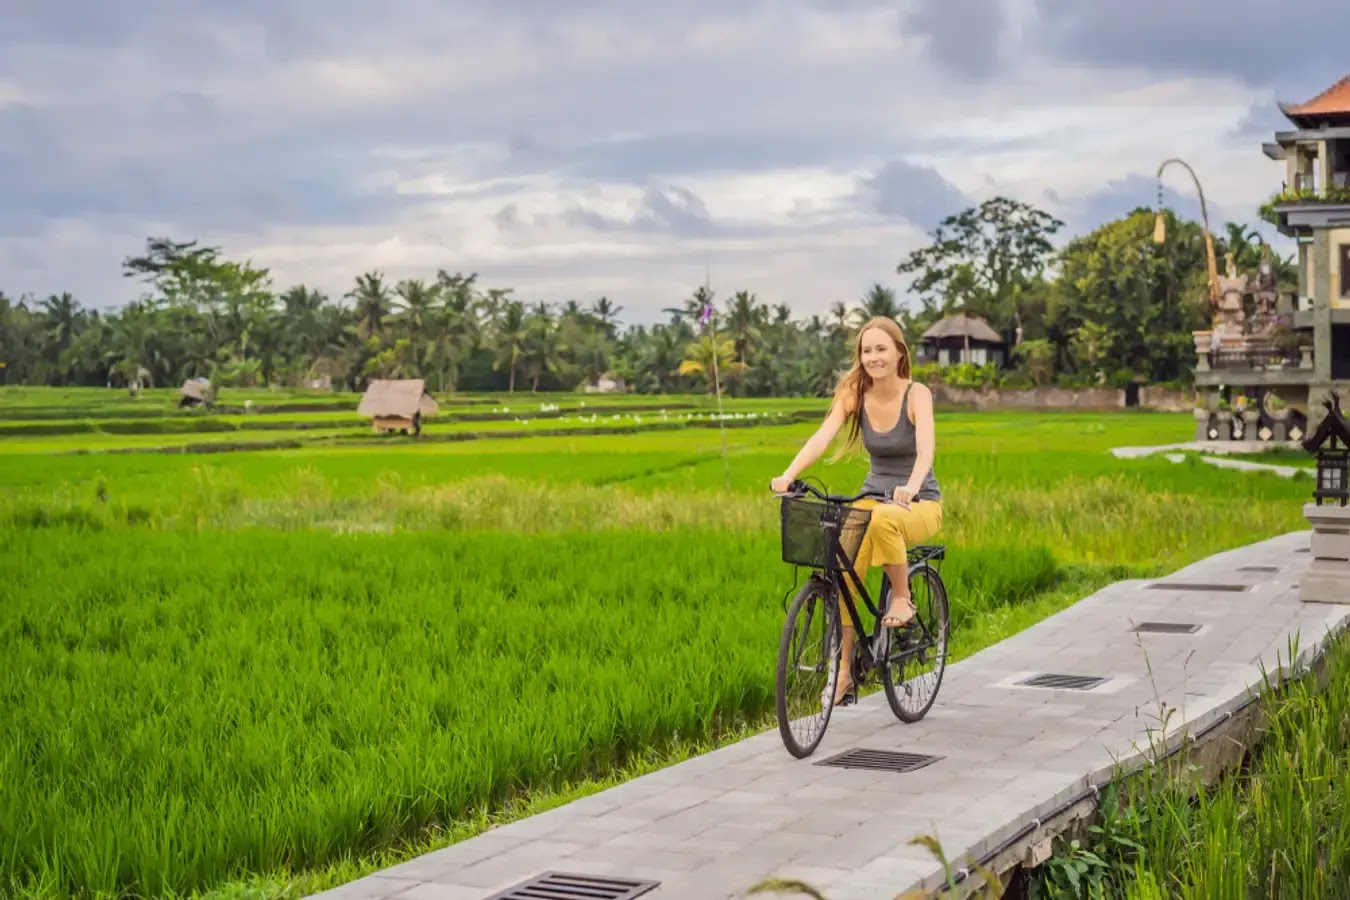 A smiling woman on a bicycle rides along a path next to vibrant green rice terraces. The backdrop features traditional architecture, suggesting a serene, rural setting, likely in a Southeast Asian countryside.